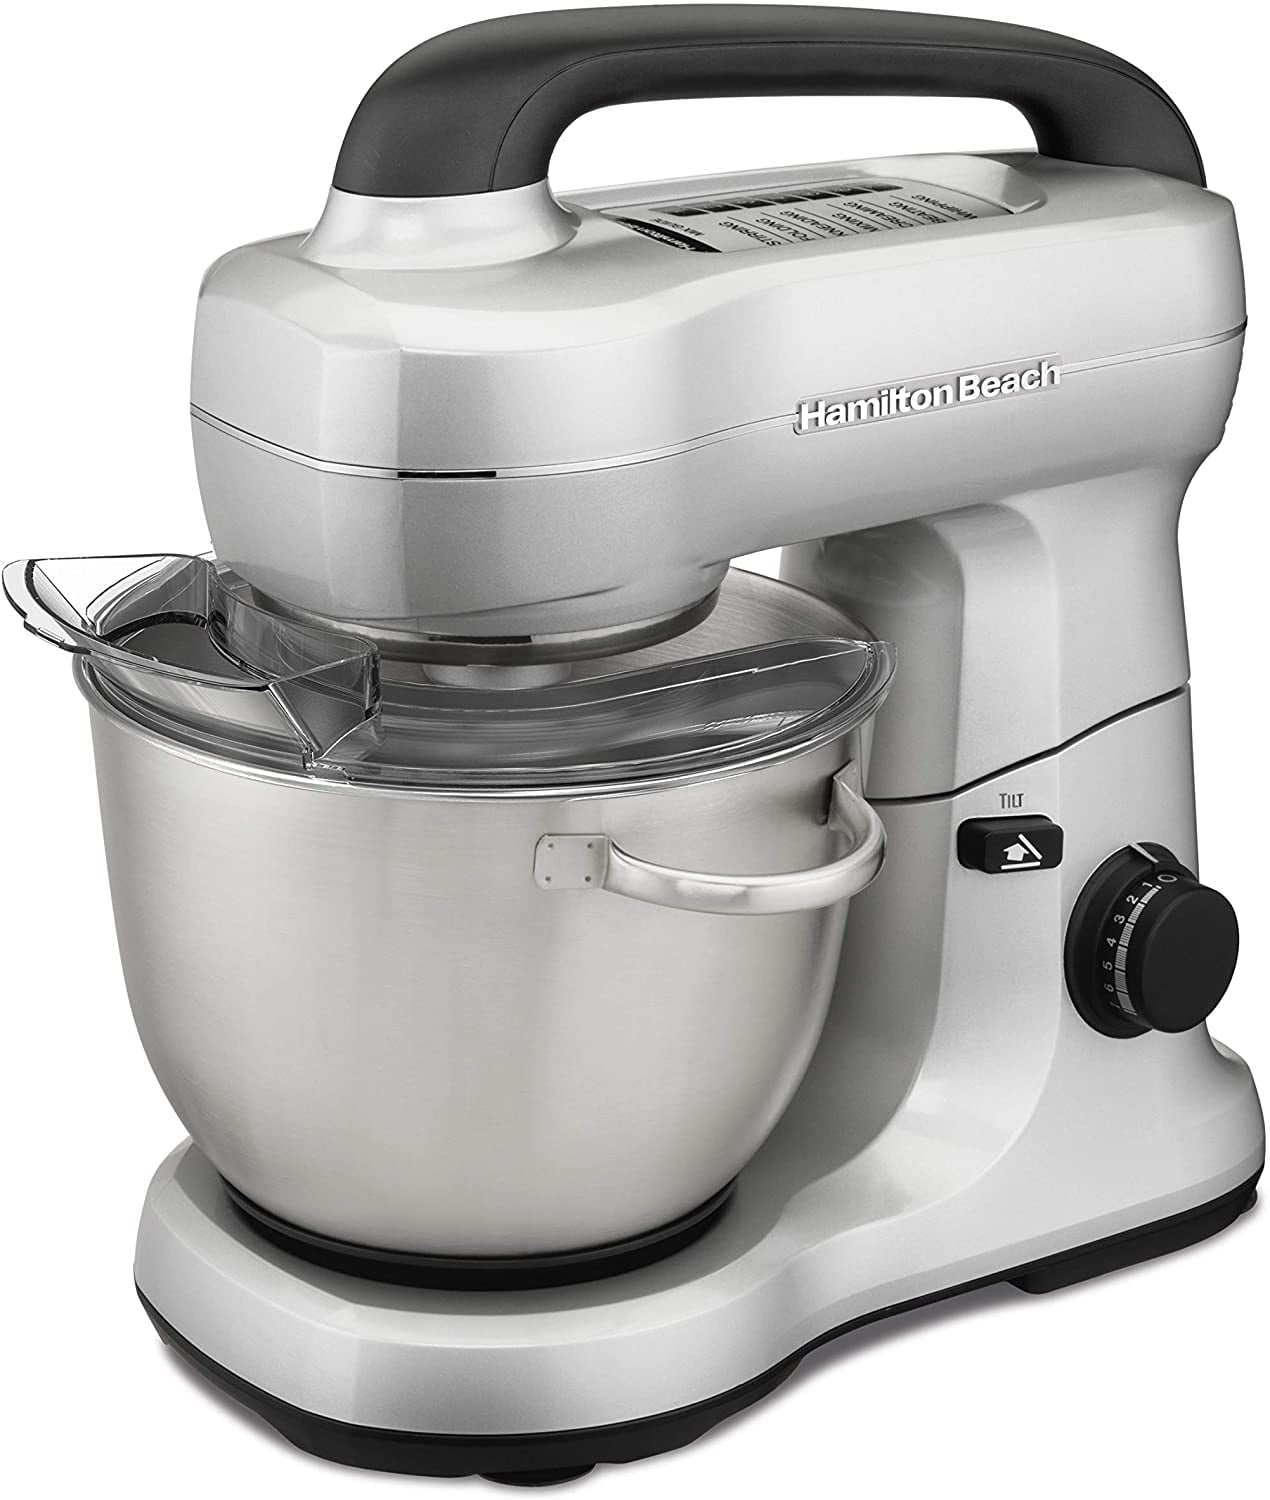 Hamilton Beach Electric Stand Mixer, 4 Quarts, 7 Speeds with Whisk